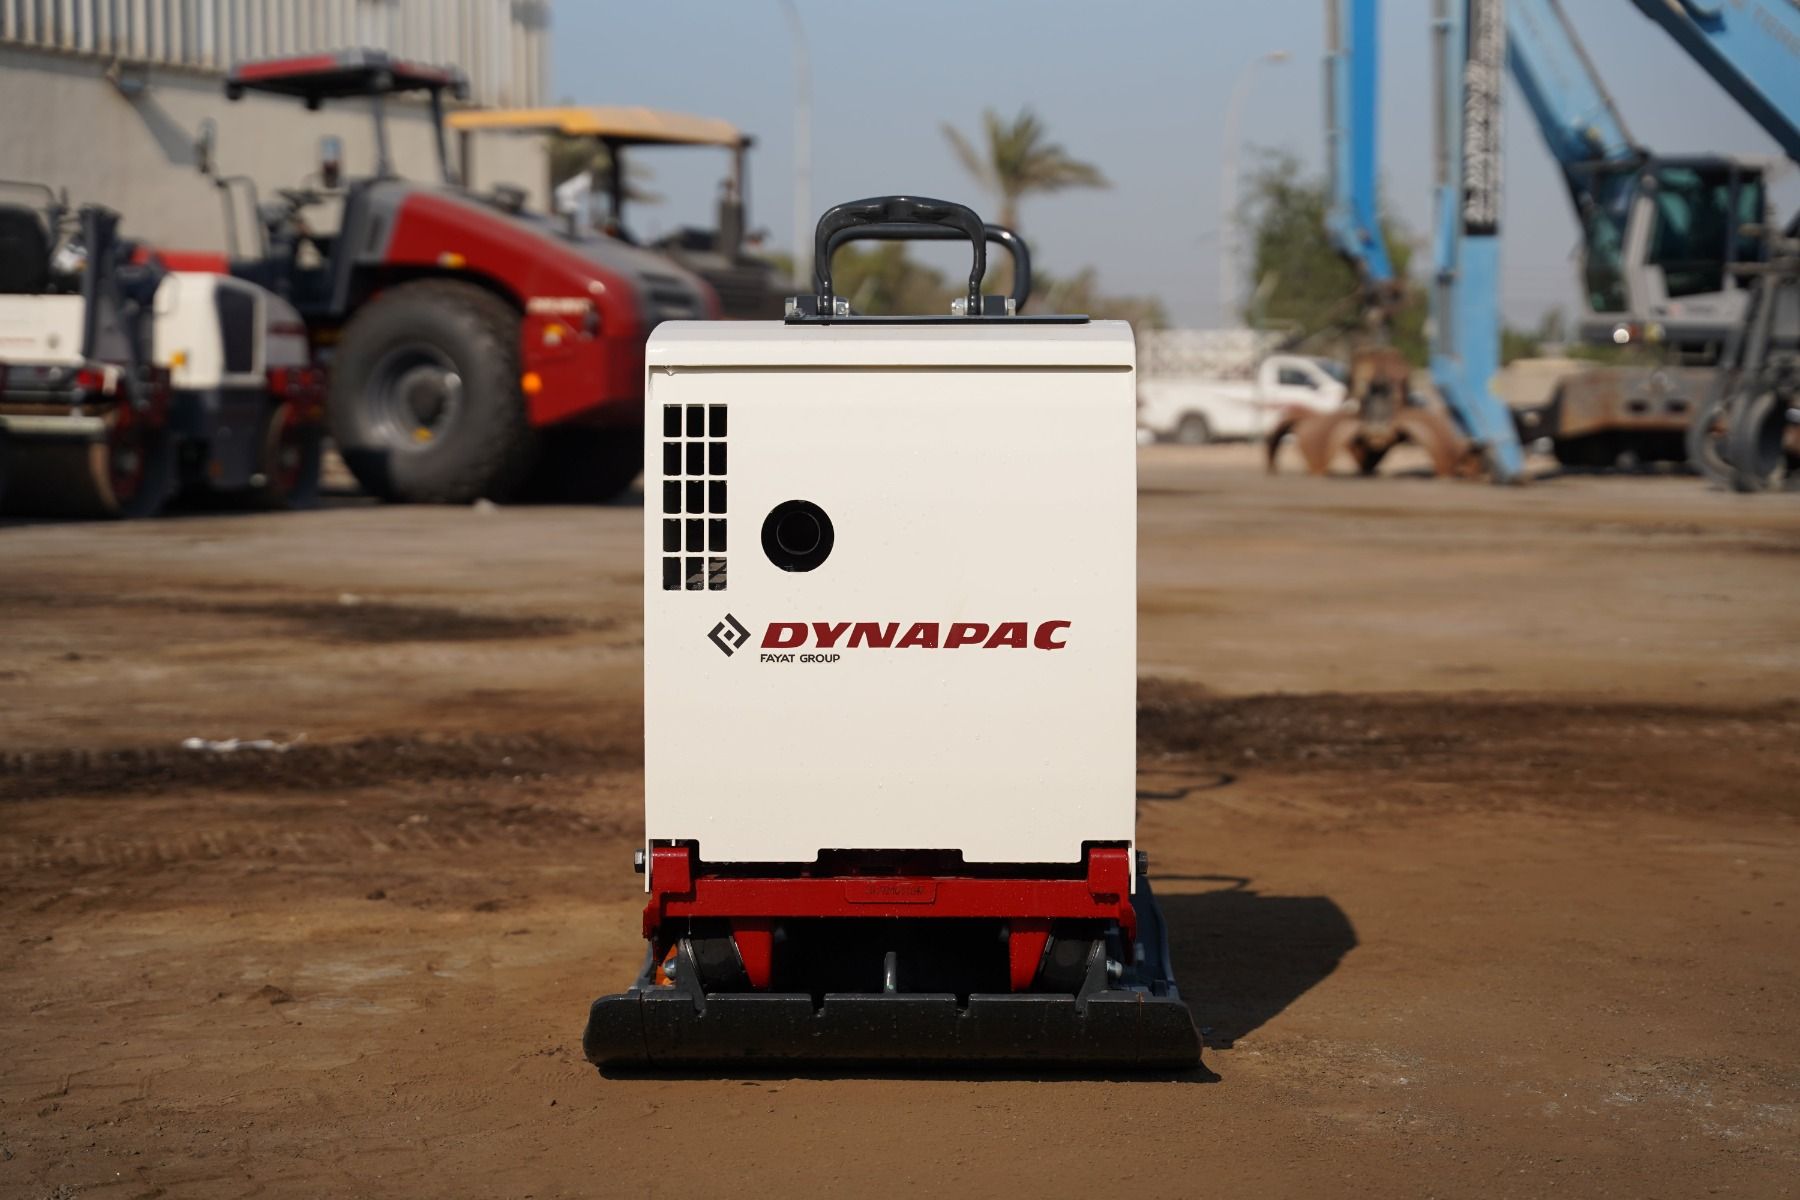 2021 Brand-New Dynapac DRP60D Reversible Plate Compactor Vibratory Compaction